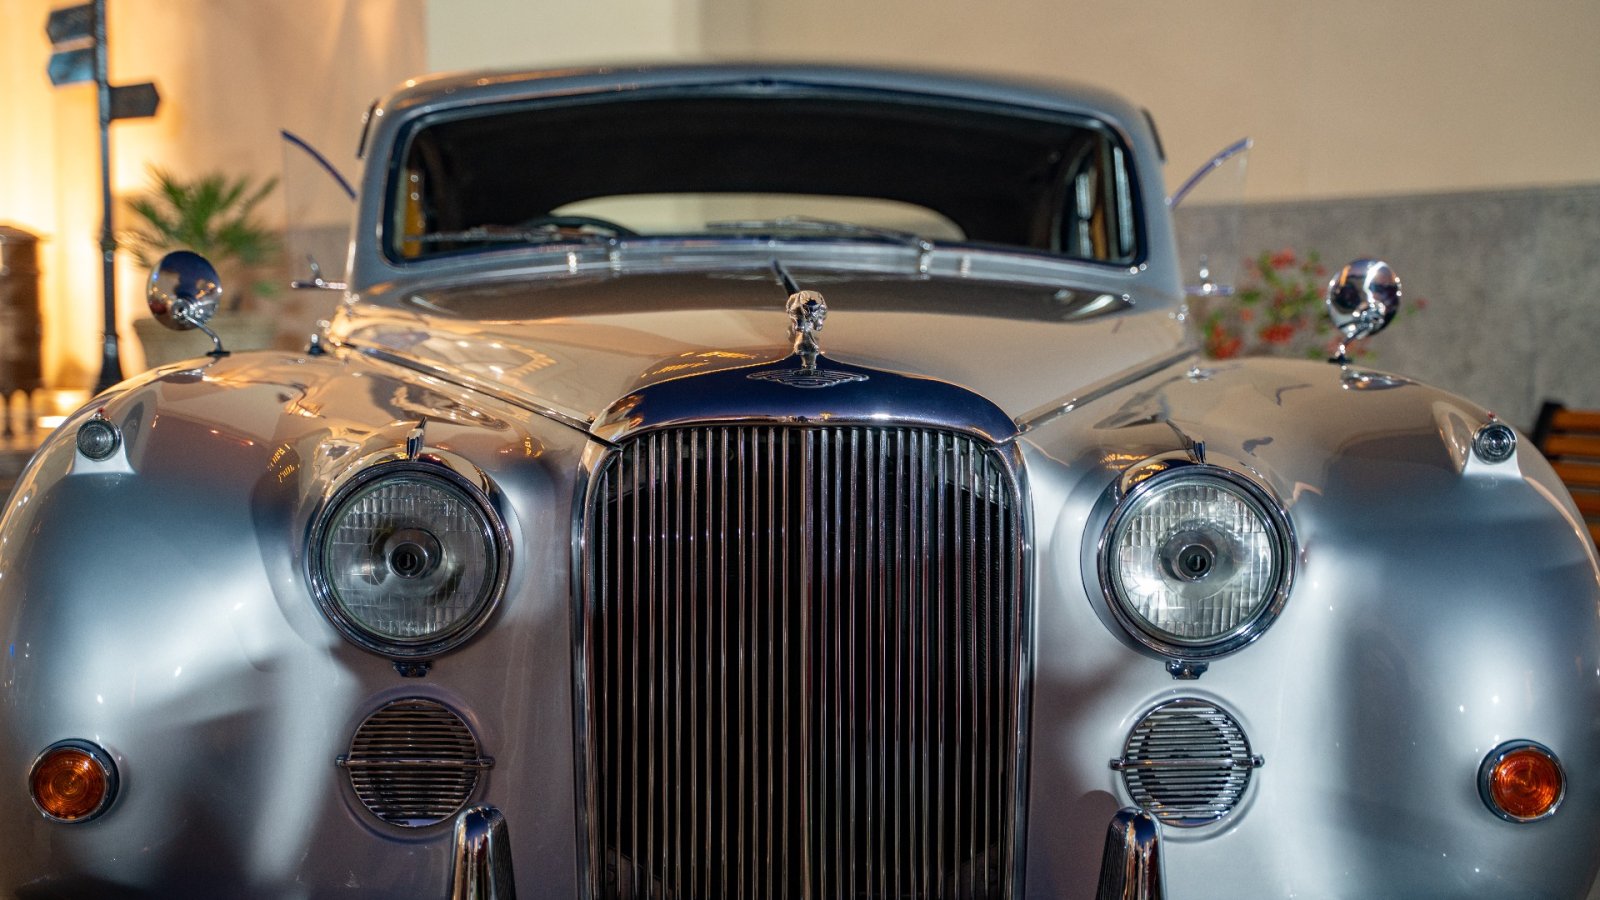 What you get and what you risk when starting to invest in collectible cars